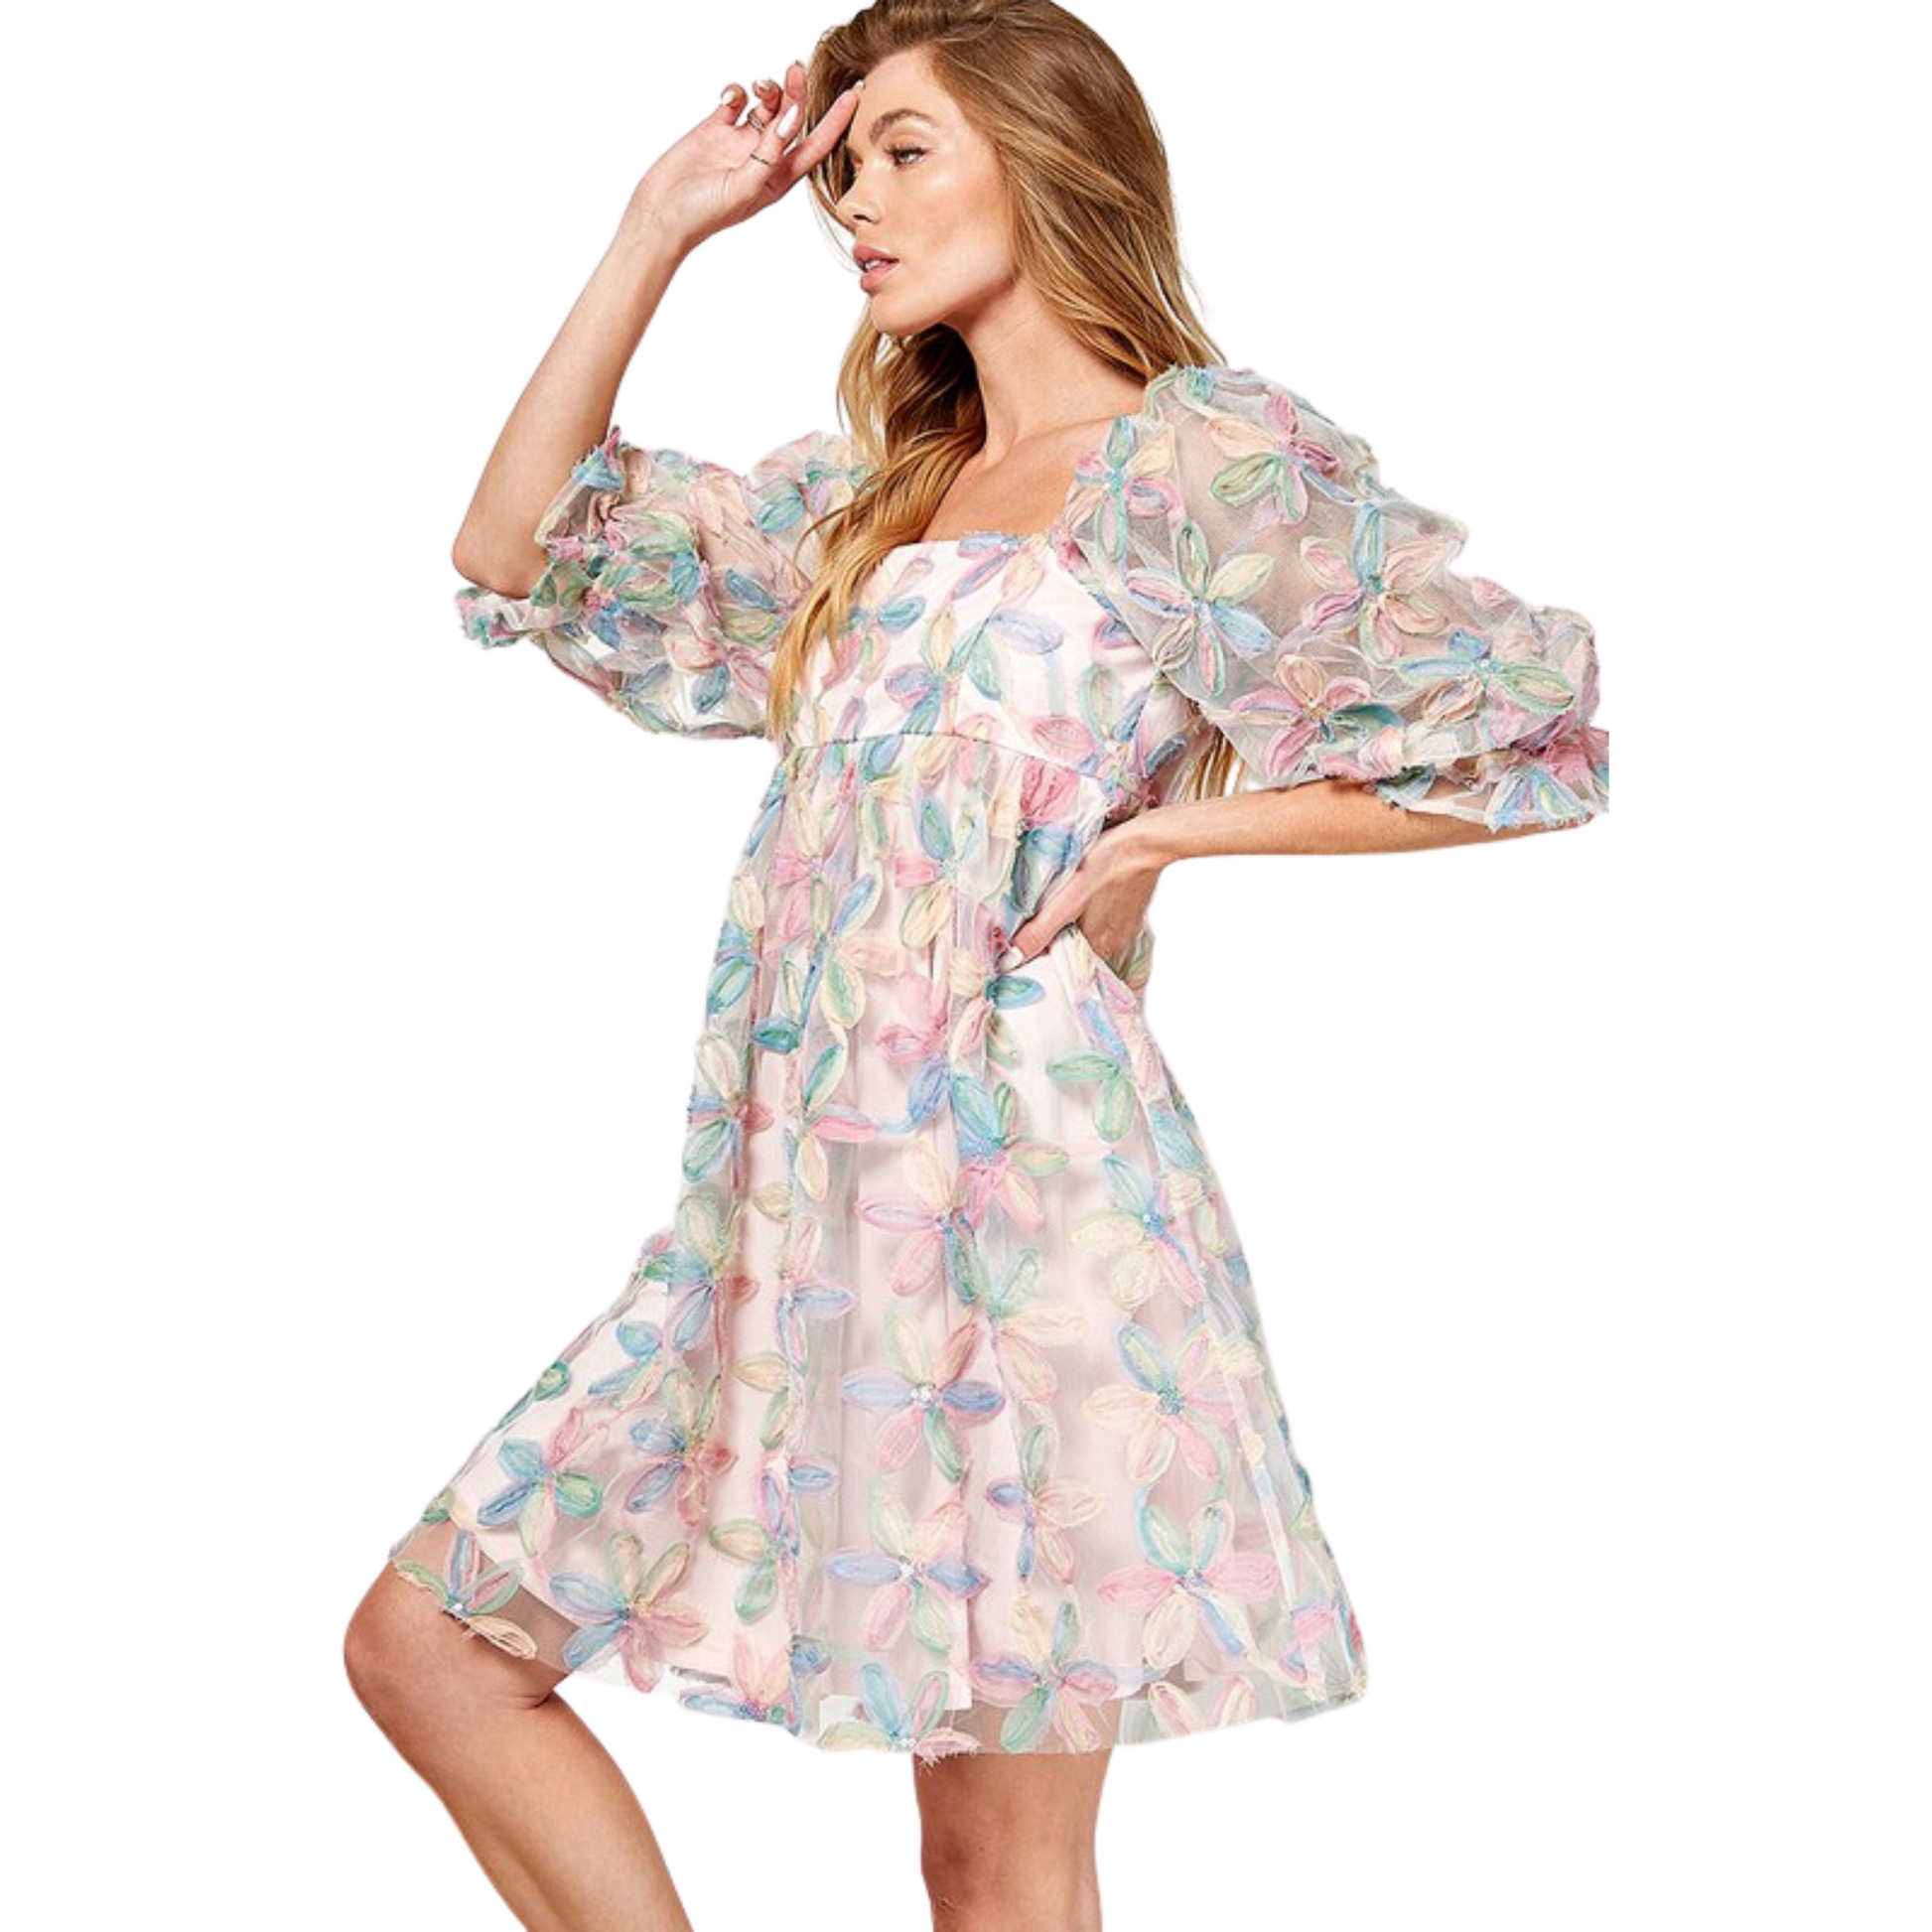 This Flower Detail Babydoll Dress is perfect for a special evening out! Its unique 3D design and sheer overlay provide a beautiful contrast, while the mini dress silhouette will flatter any body type. Look and feel amazing in this gorgeous dress!